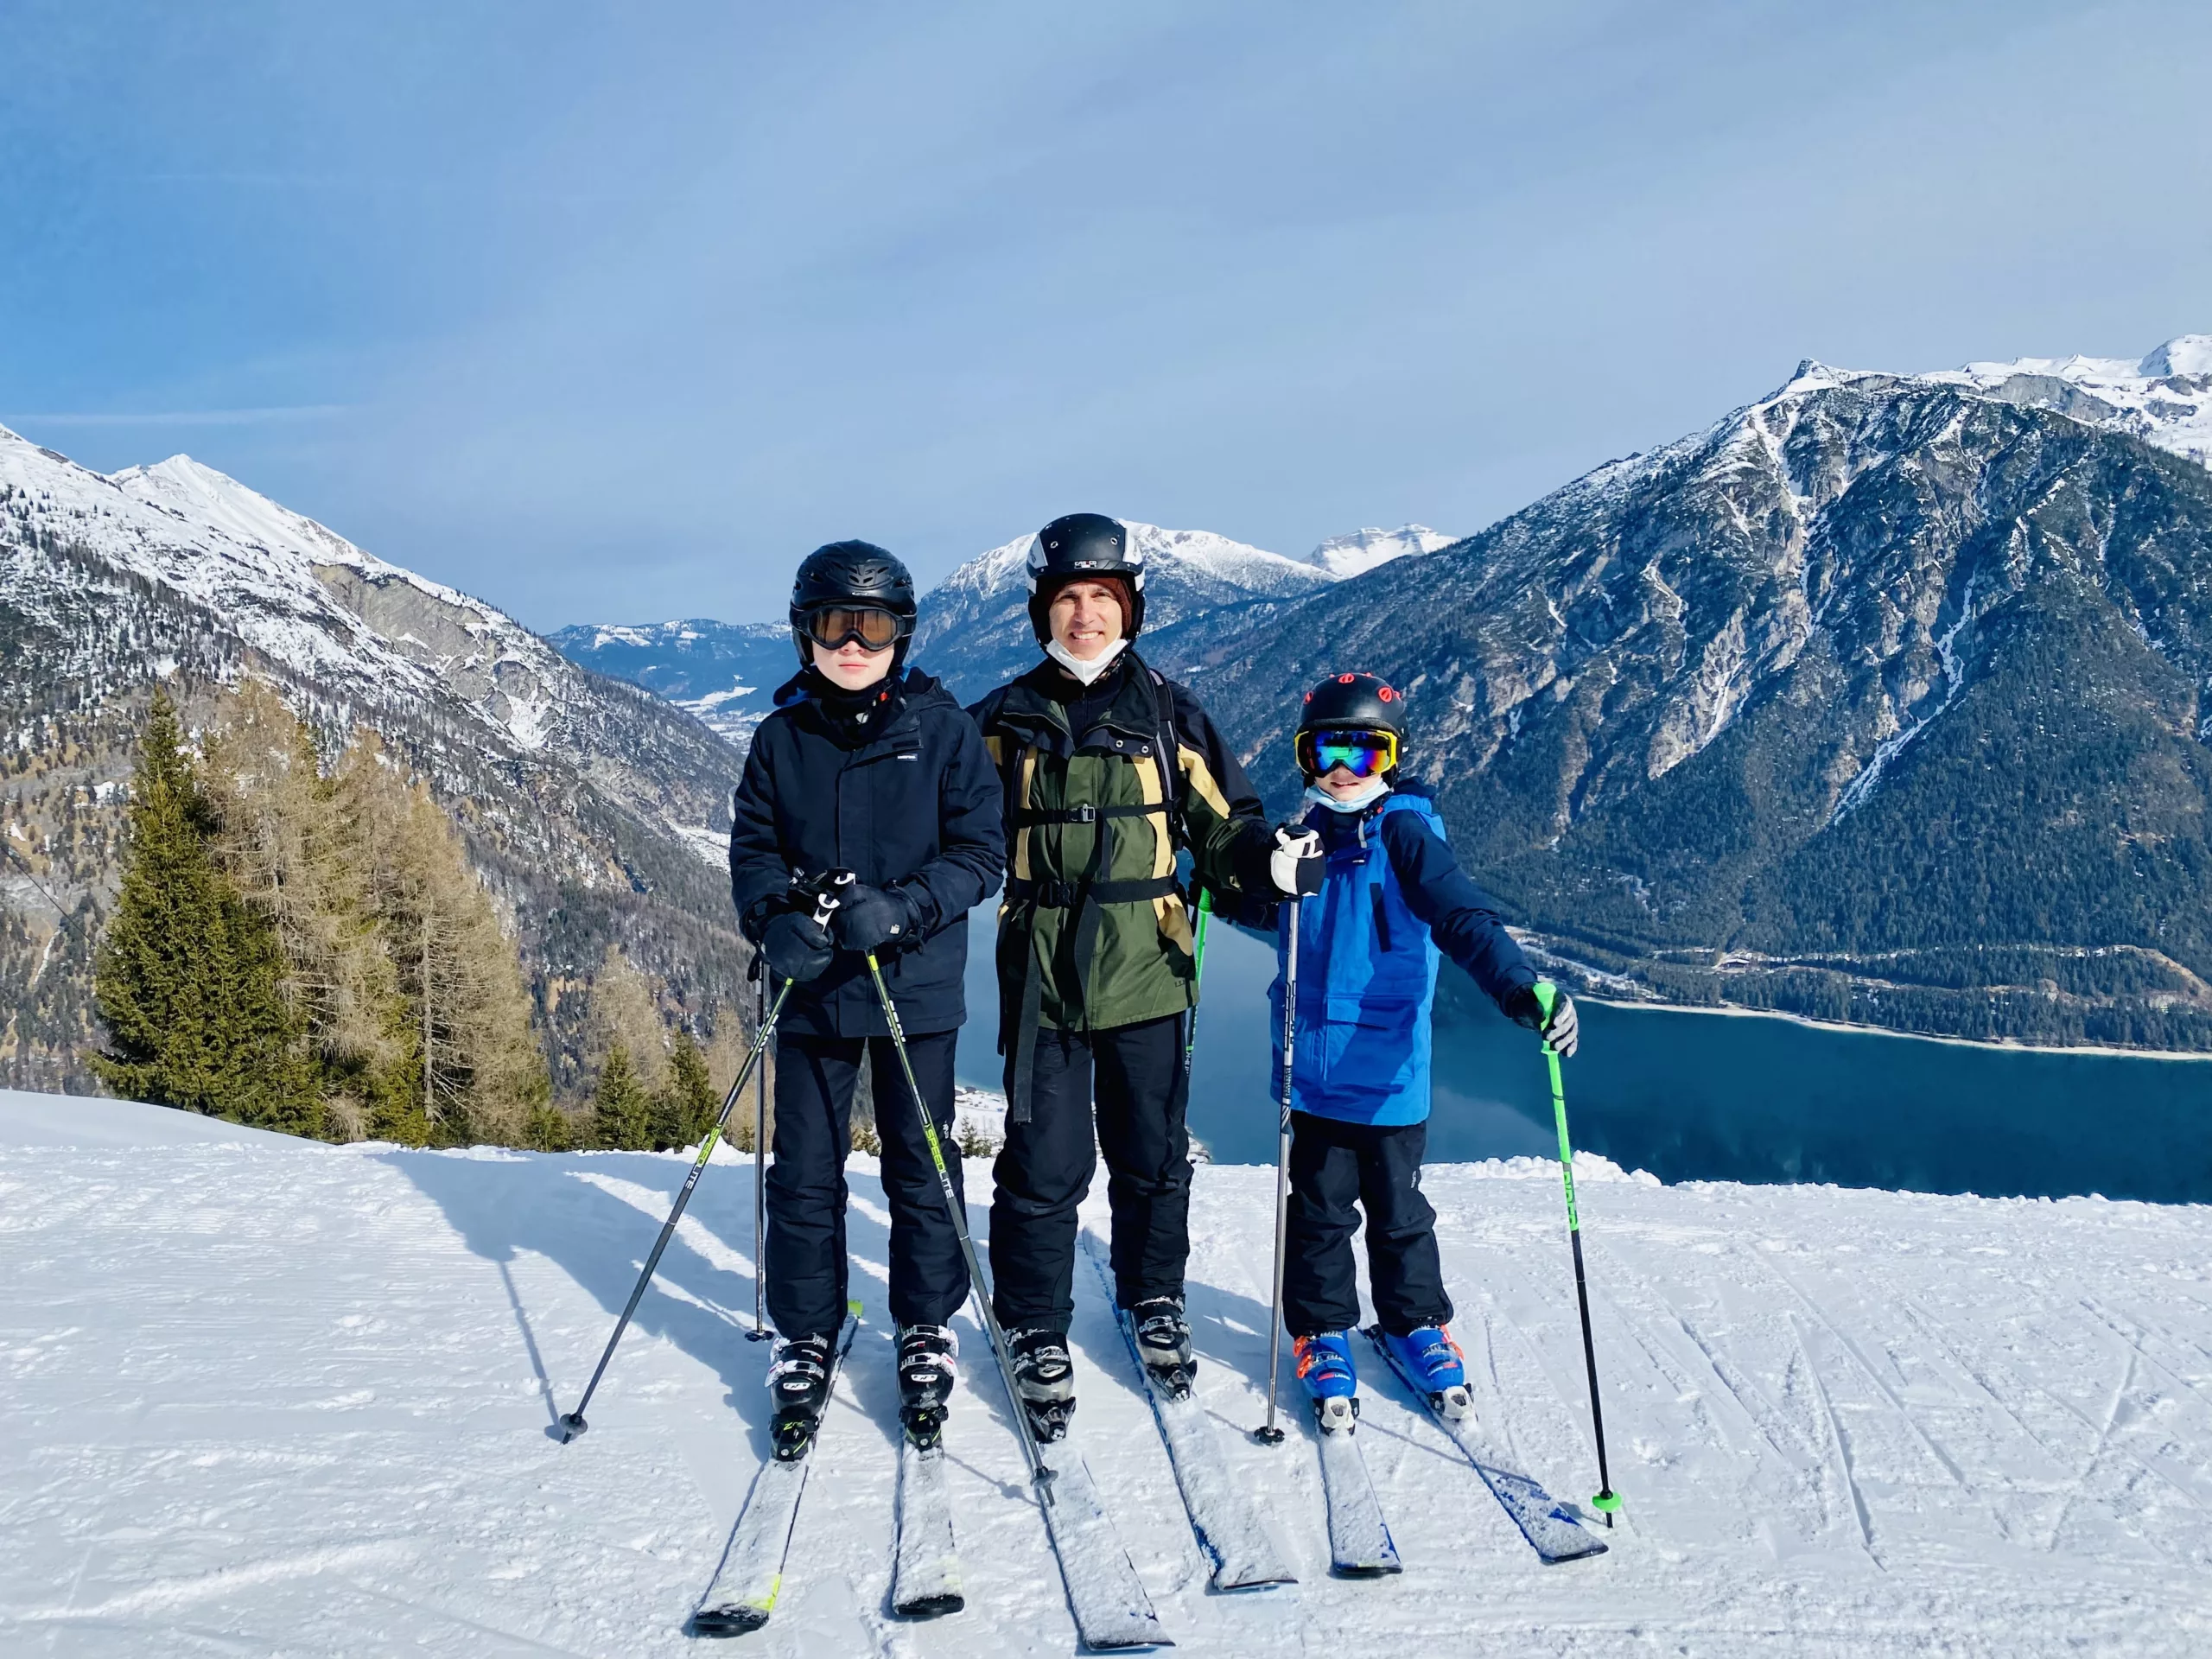 Skiing in Austria is Underrated – Why It’s Worth Checking Out!